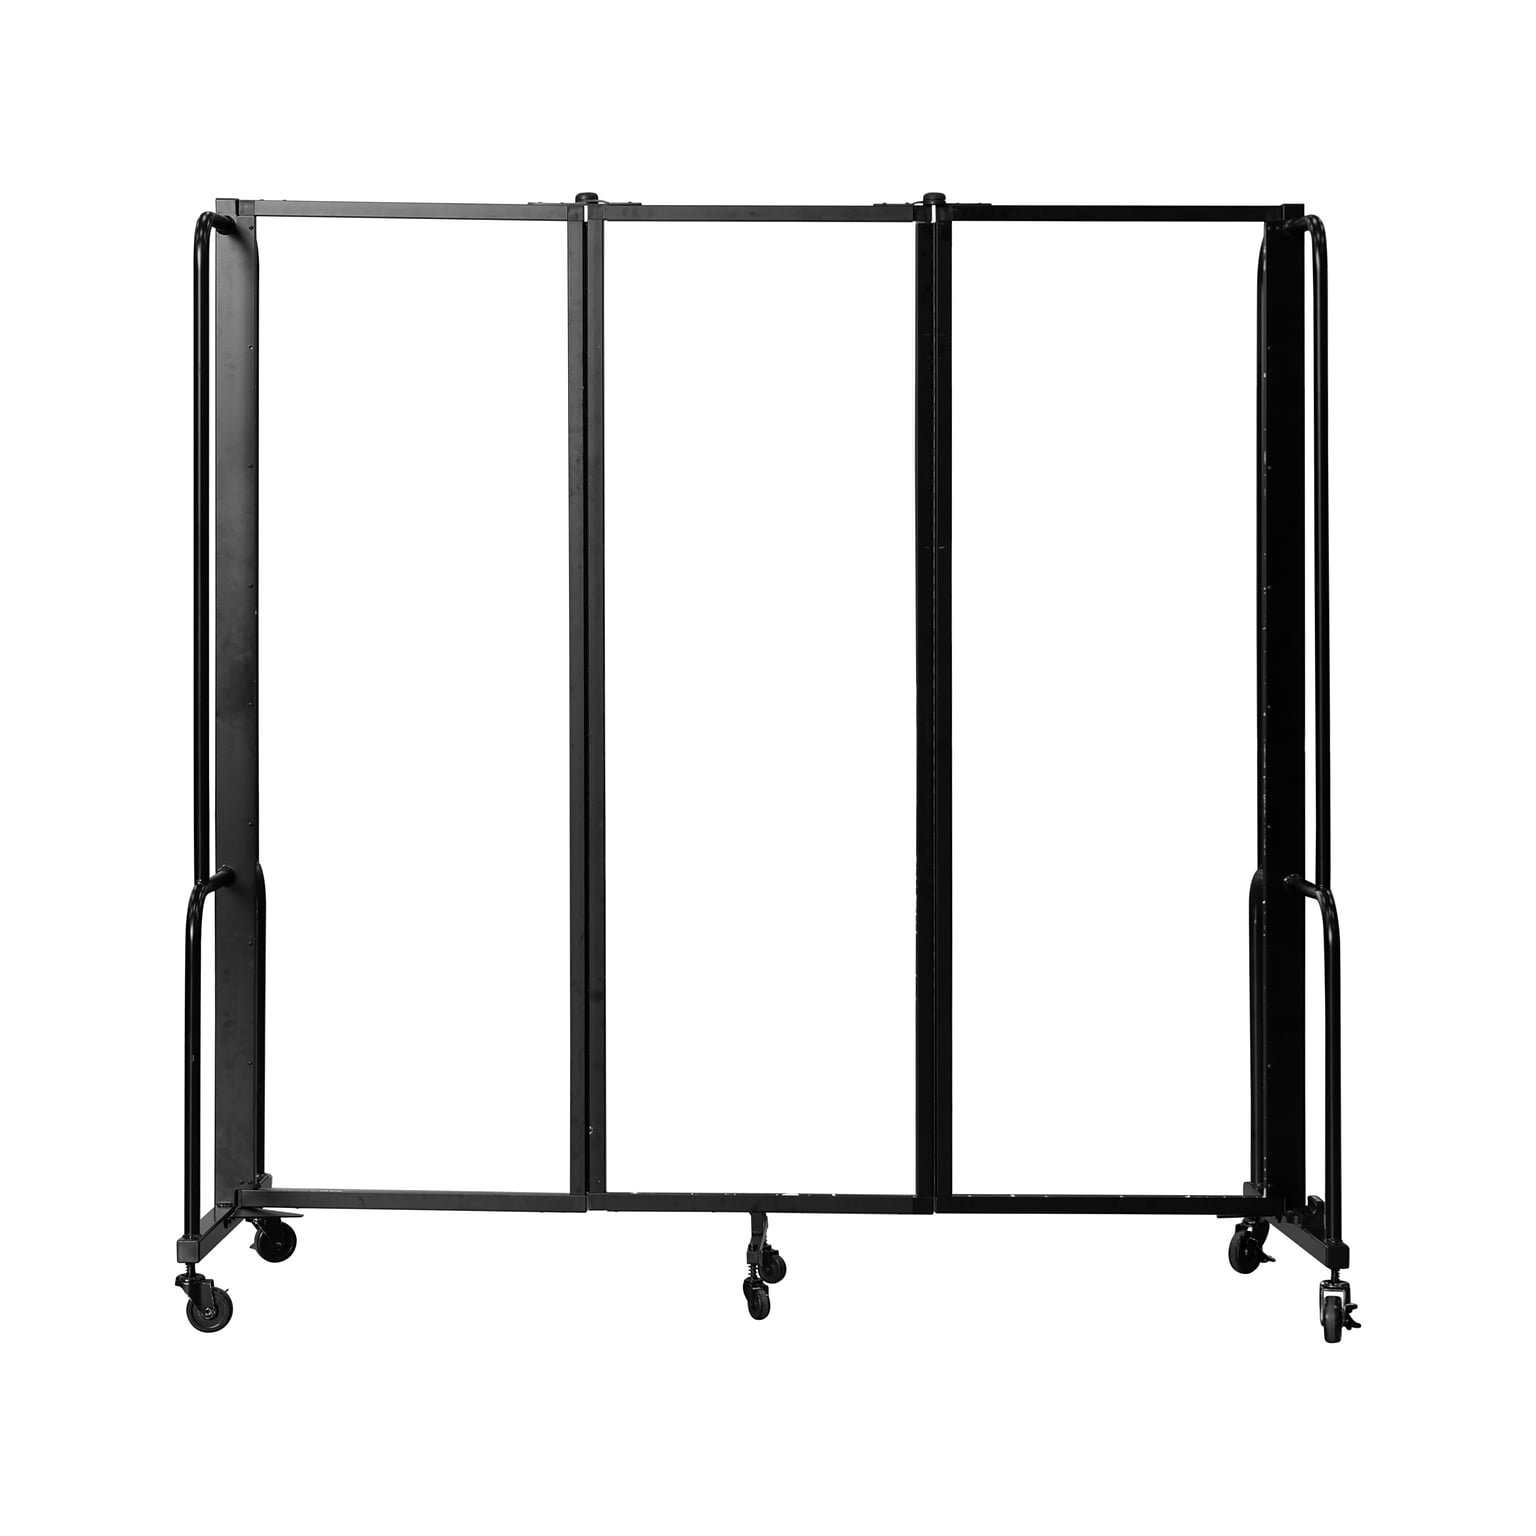 National Public Seating Robo Freestanding 3-Panel Room Divider, 72H x 72W, Clear Acrylic (RDB6-3CA)